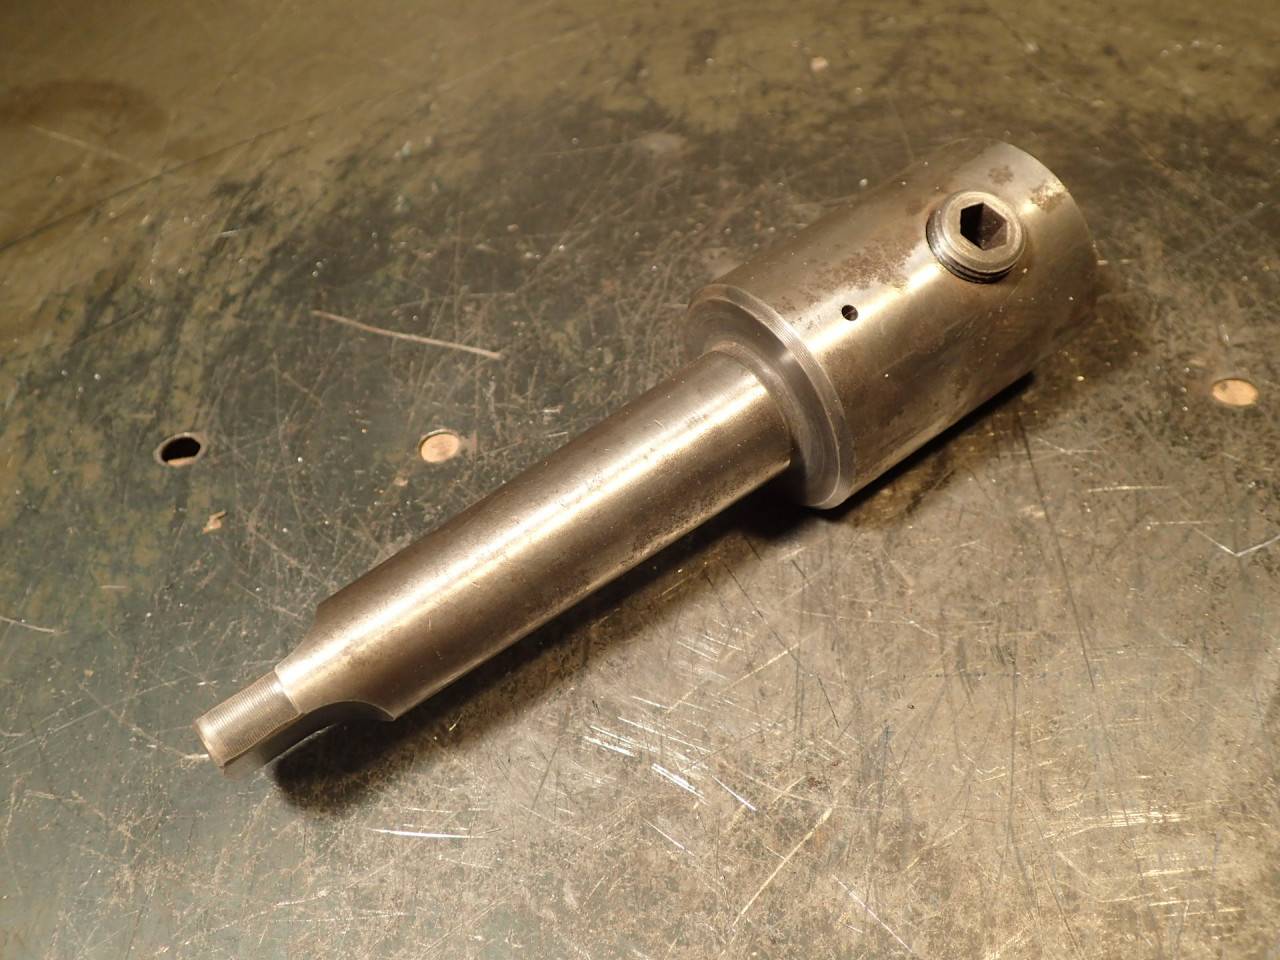 Buy 3/4" End Mill Tool Holder: Morse Taper #3 Shank (MT3 3MT) Used in Good  Condition Lot #1912.092 on the Aucto Marketplace